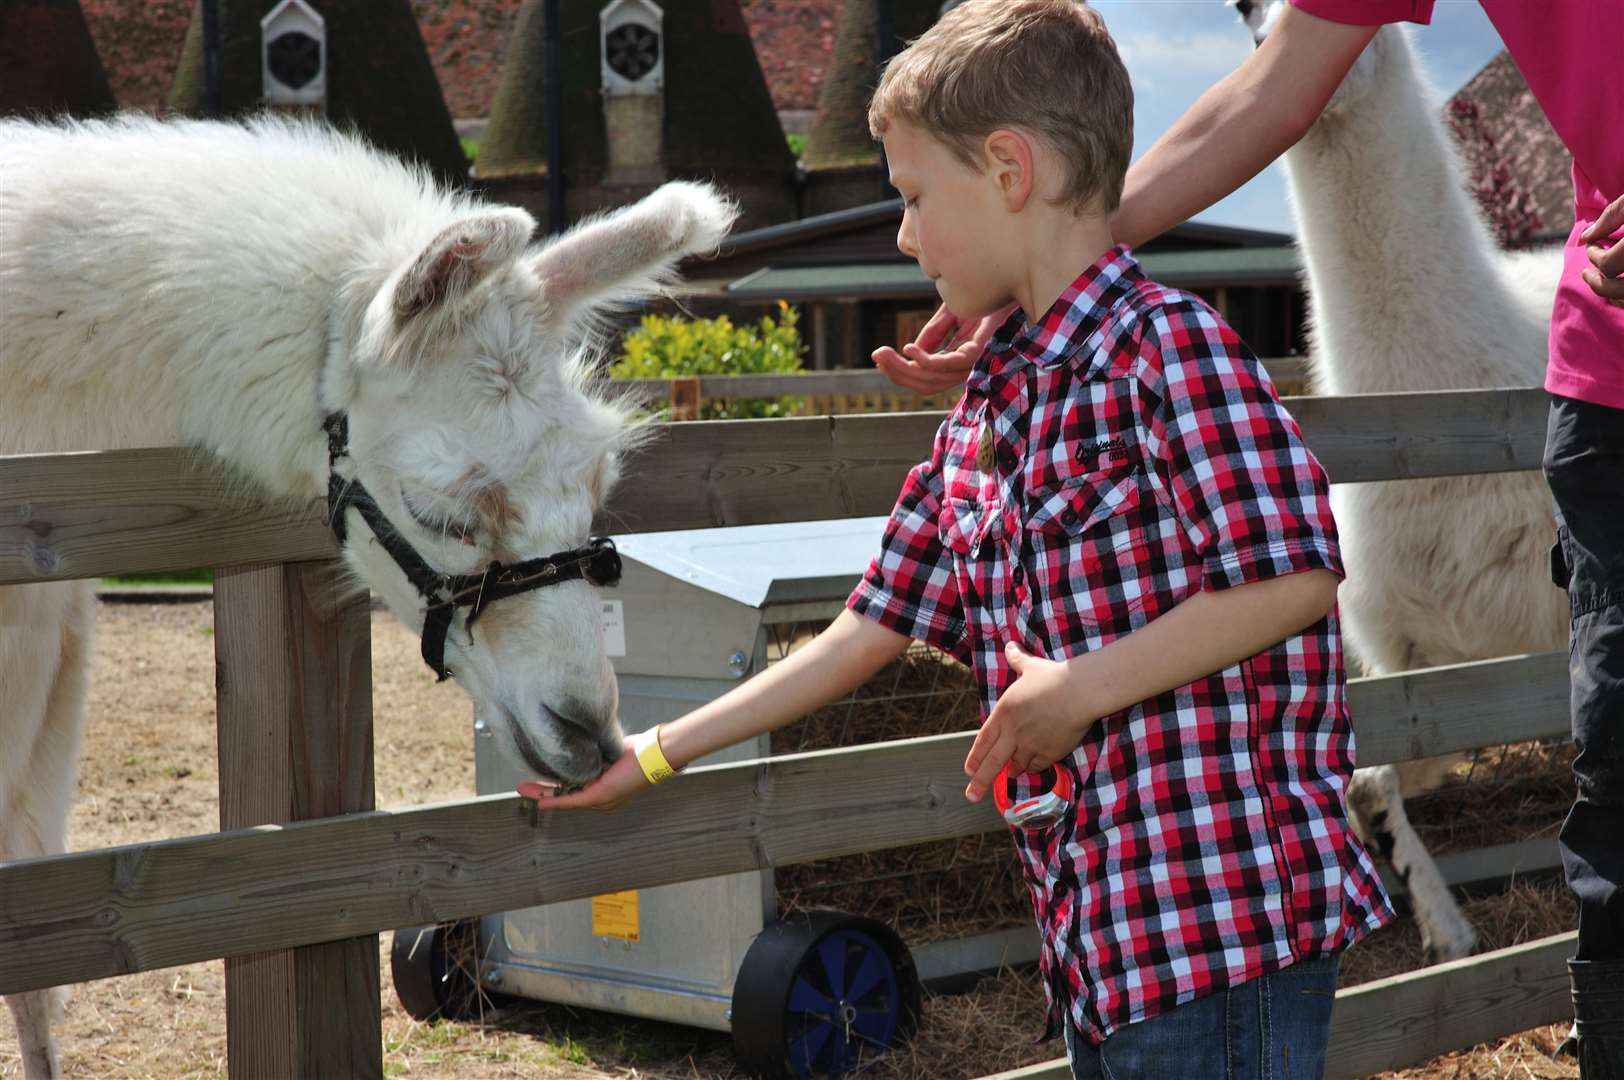 Visitors can see some of the animals at the reopened Hop Farm